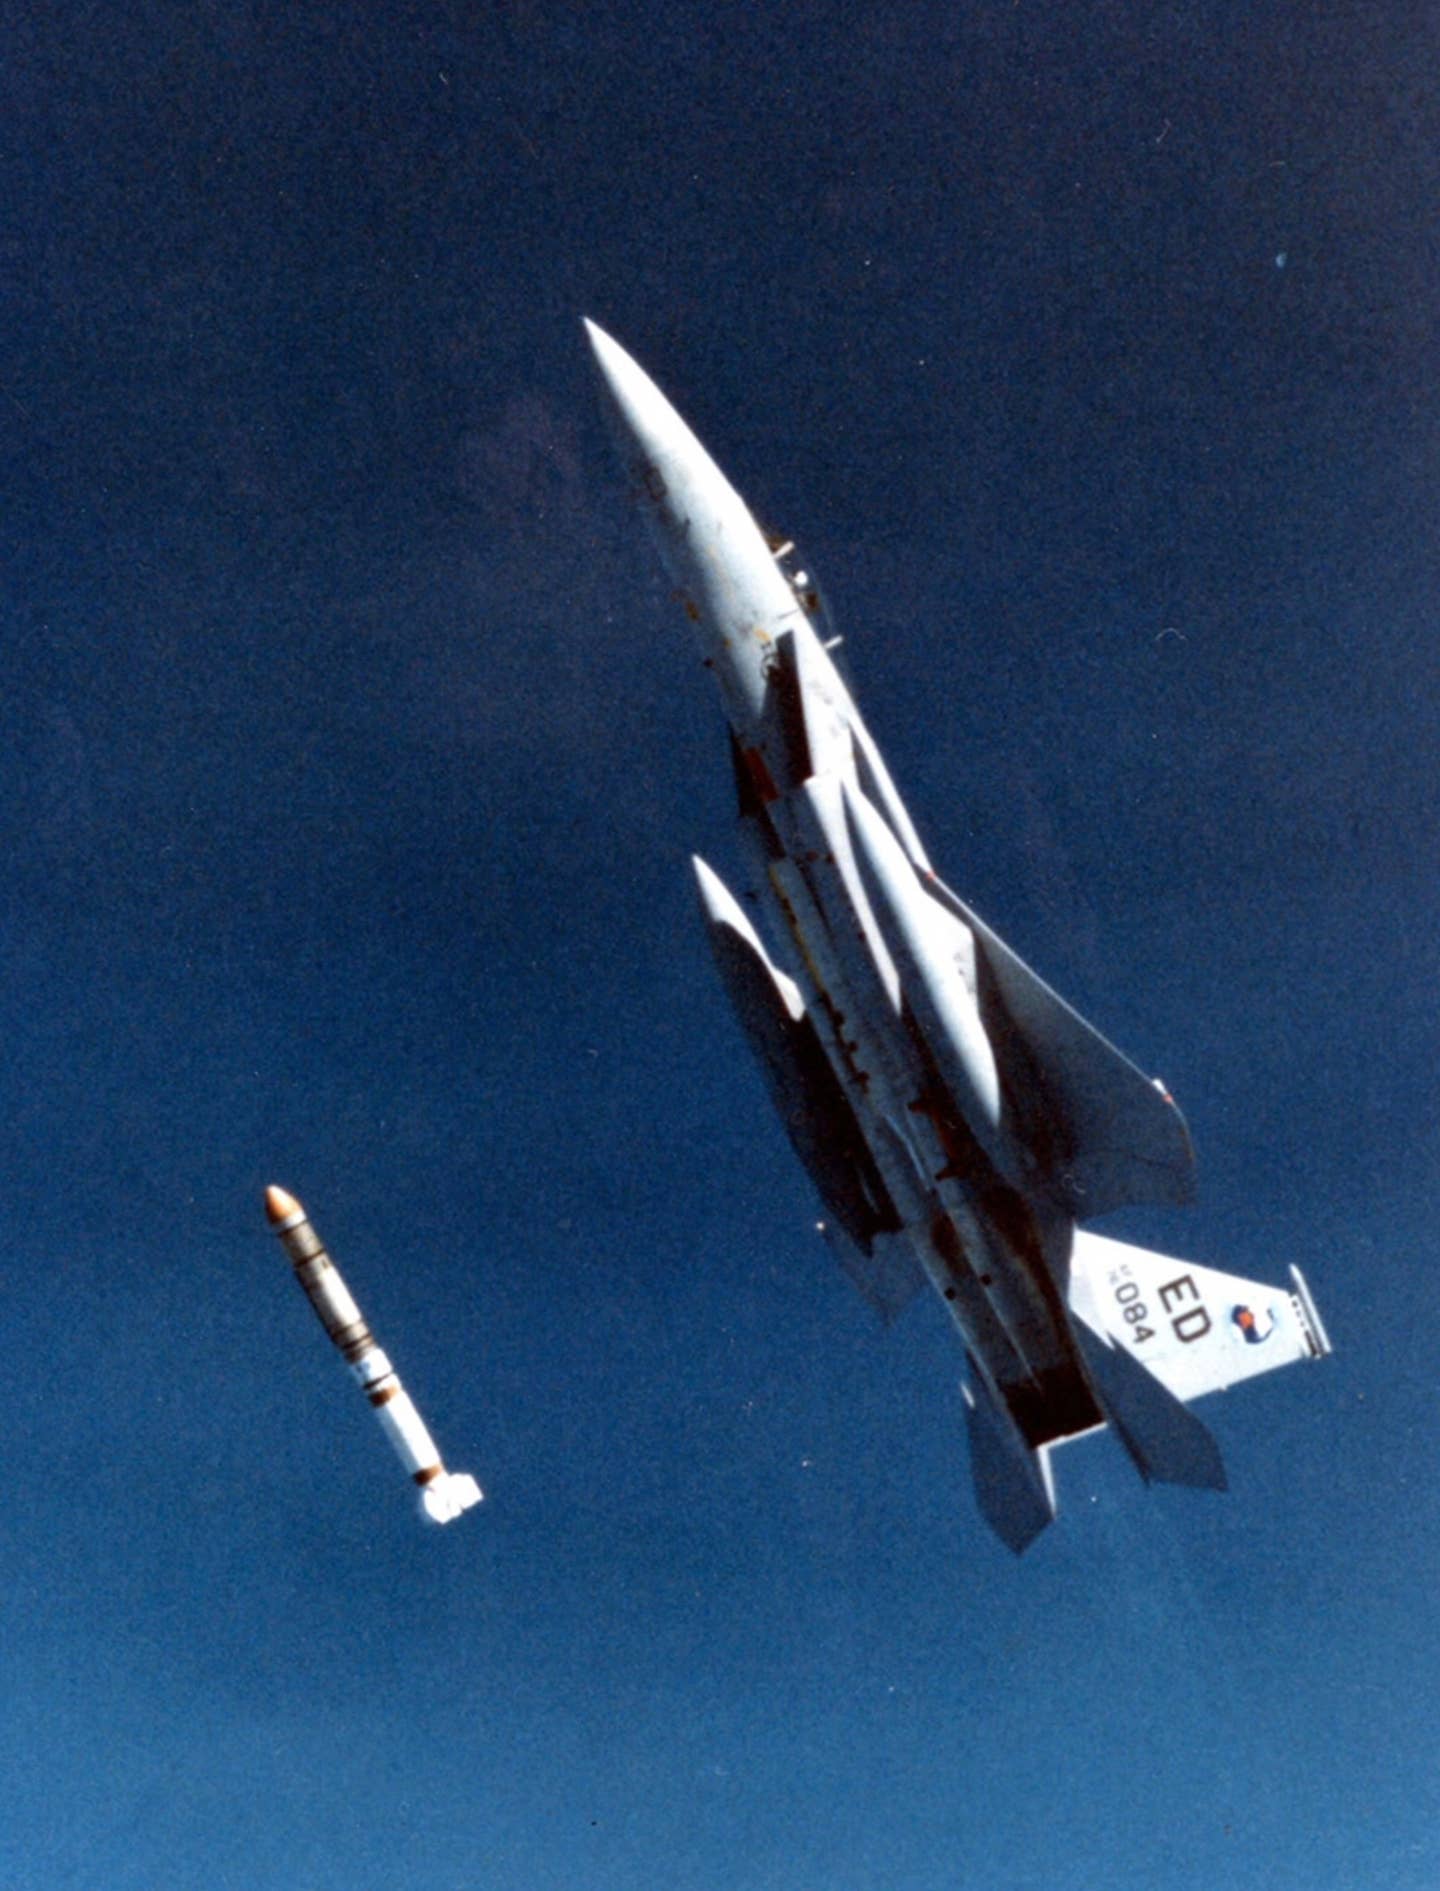 Maj Gen Pearson is credited with the USAF’s one and only satellite shoot-down. He is seen here doing so. Credit: USAF<br><br>